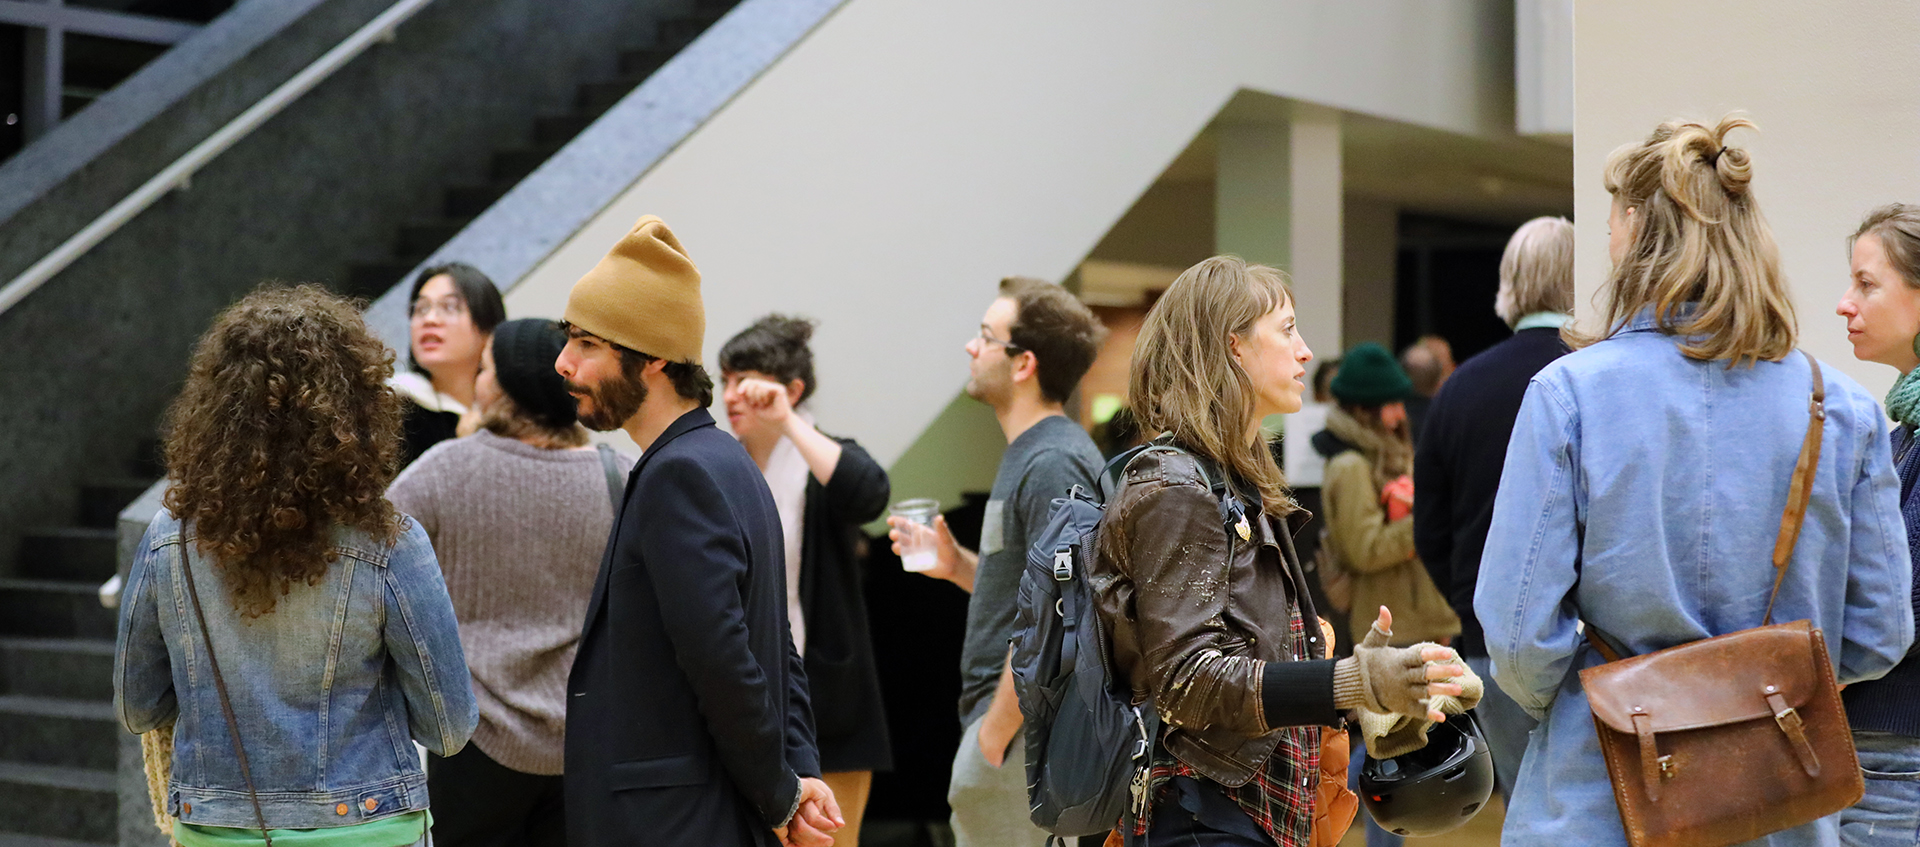 A group of people standing and mingling in the Wexner Center's lower lobby.